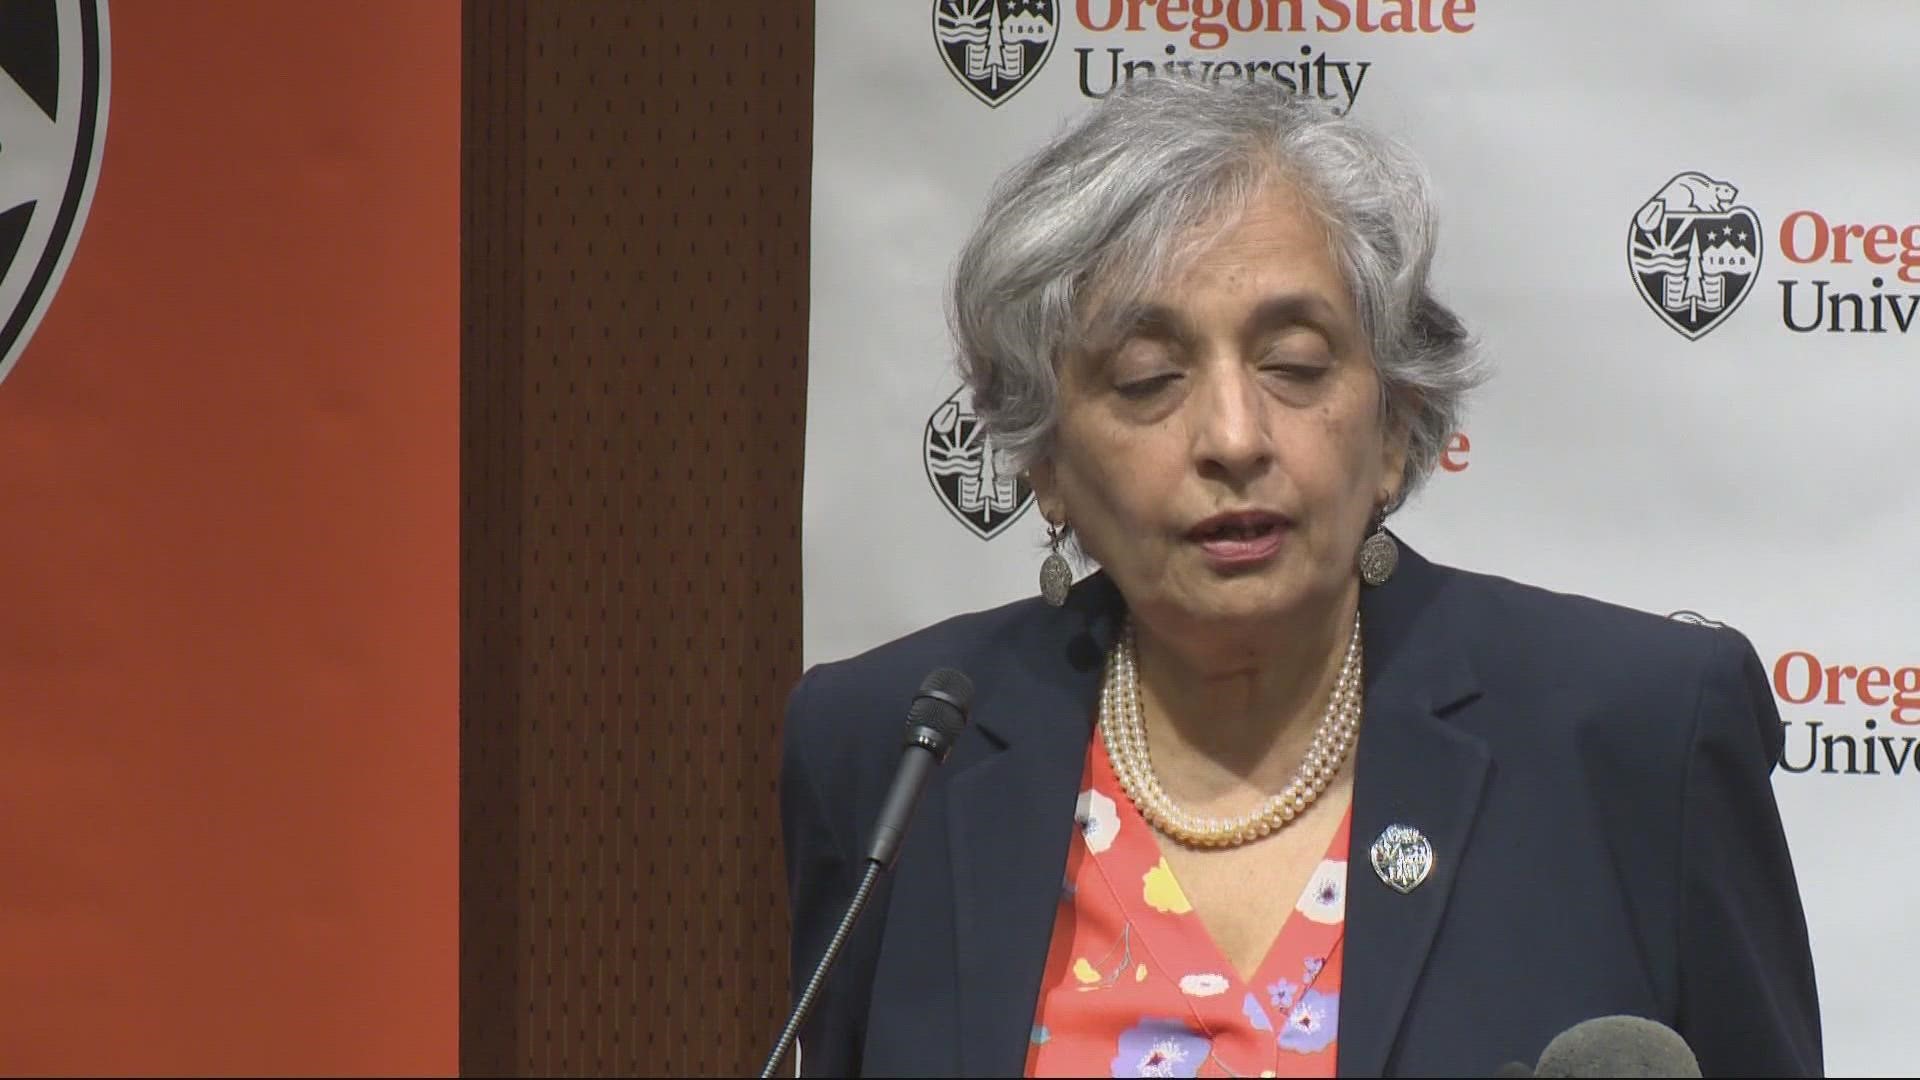 Murthy will be the first woman of color to serve as president of OSU. University officials touted her engineering background and her history of advancing diversity.